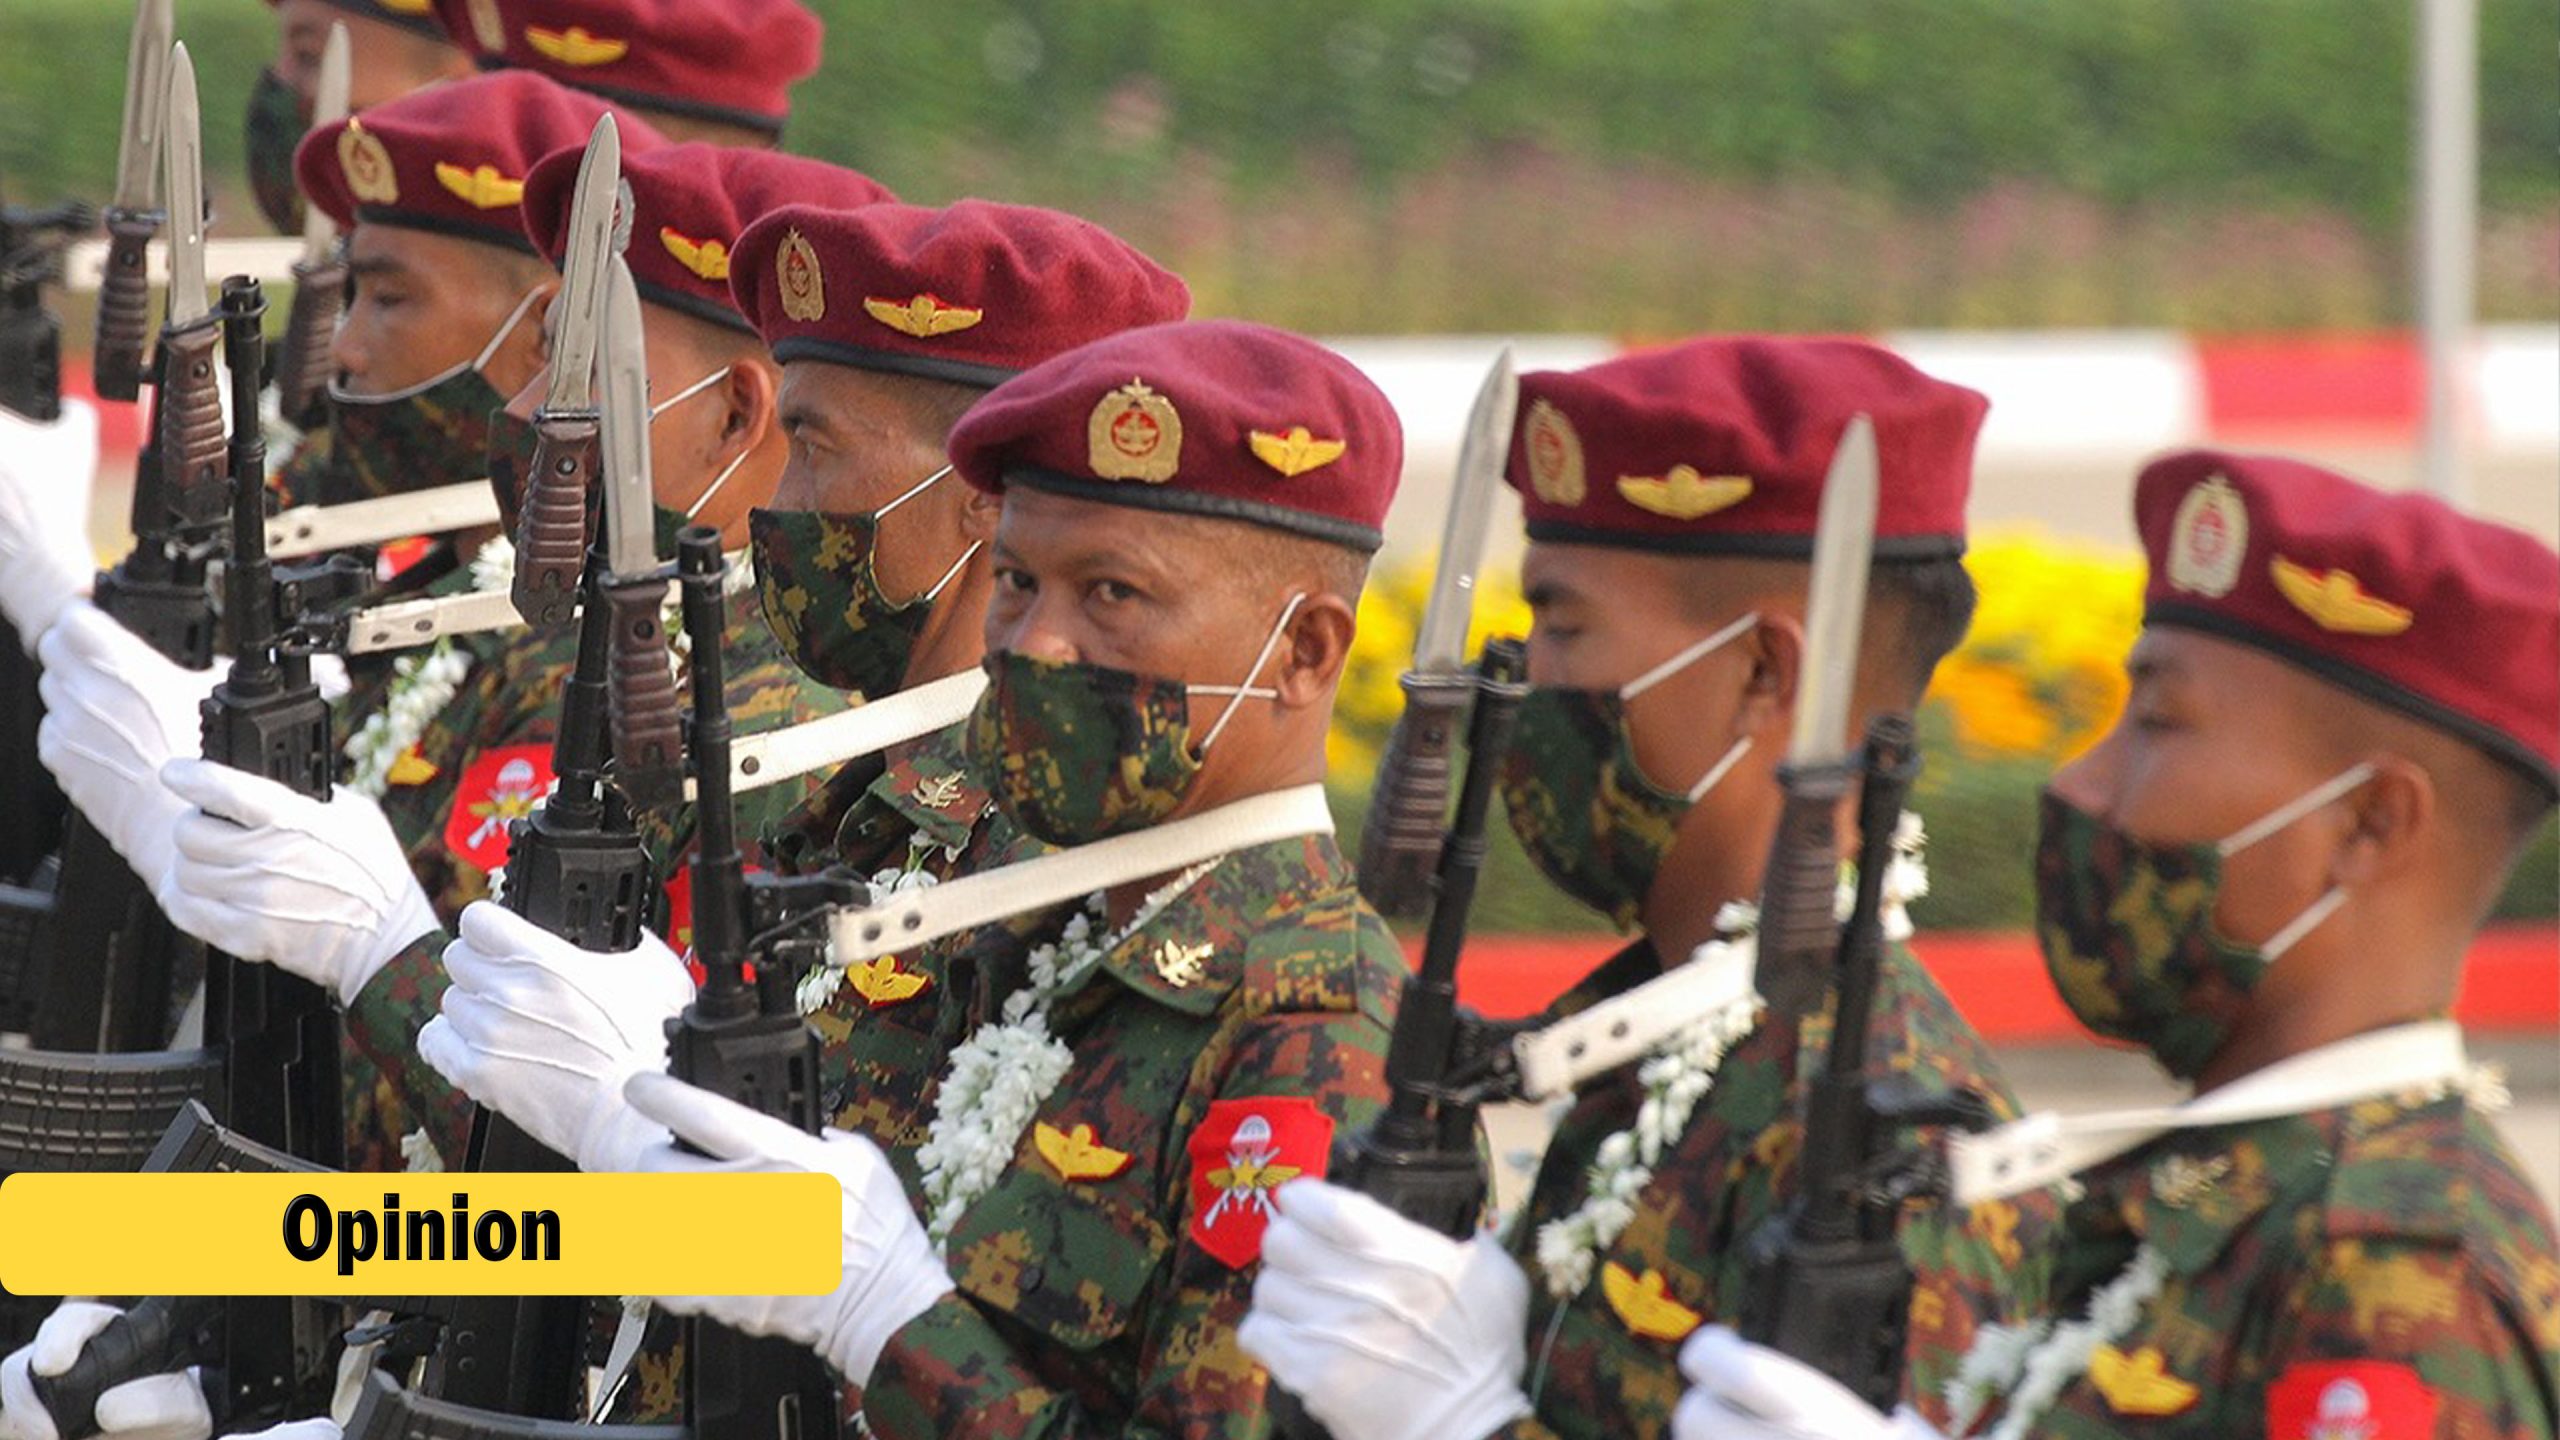 Chatting Politics in Thailand Hangouts: Myanmar, the Military, and Civil Society